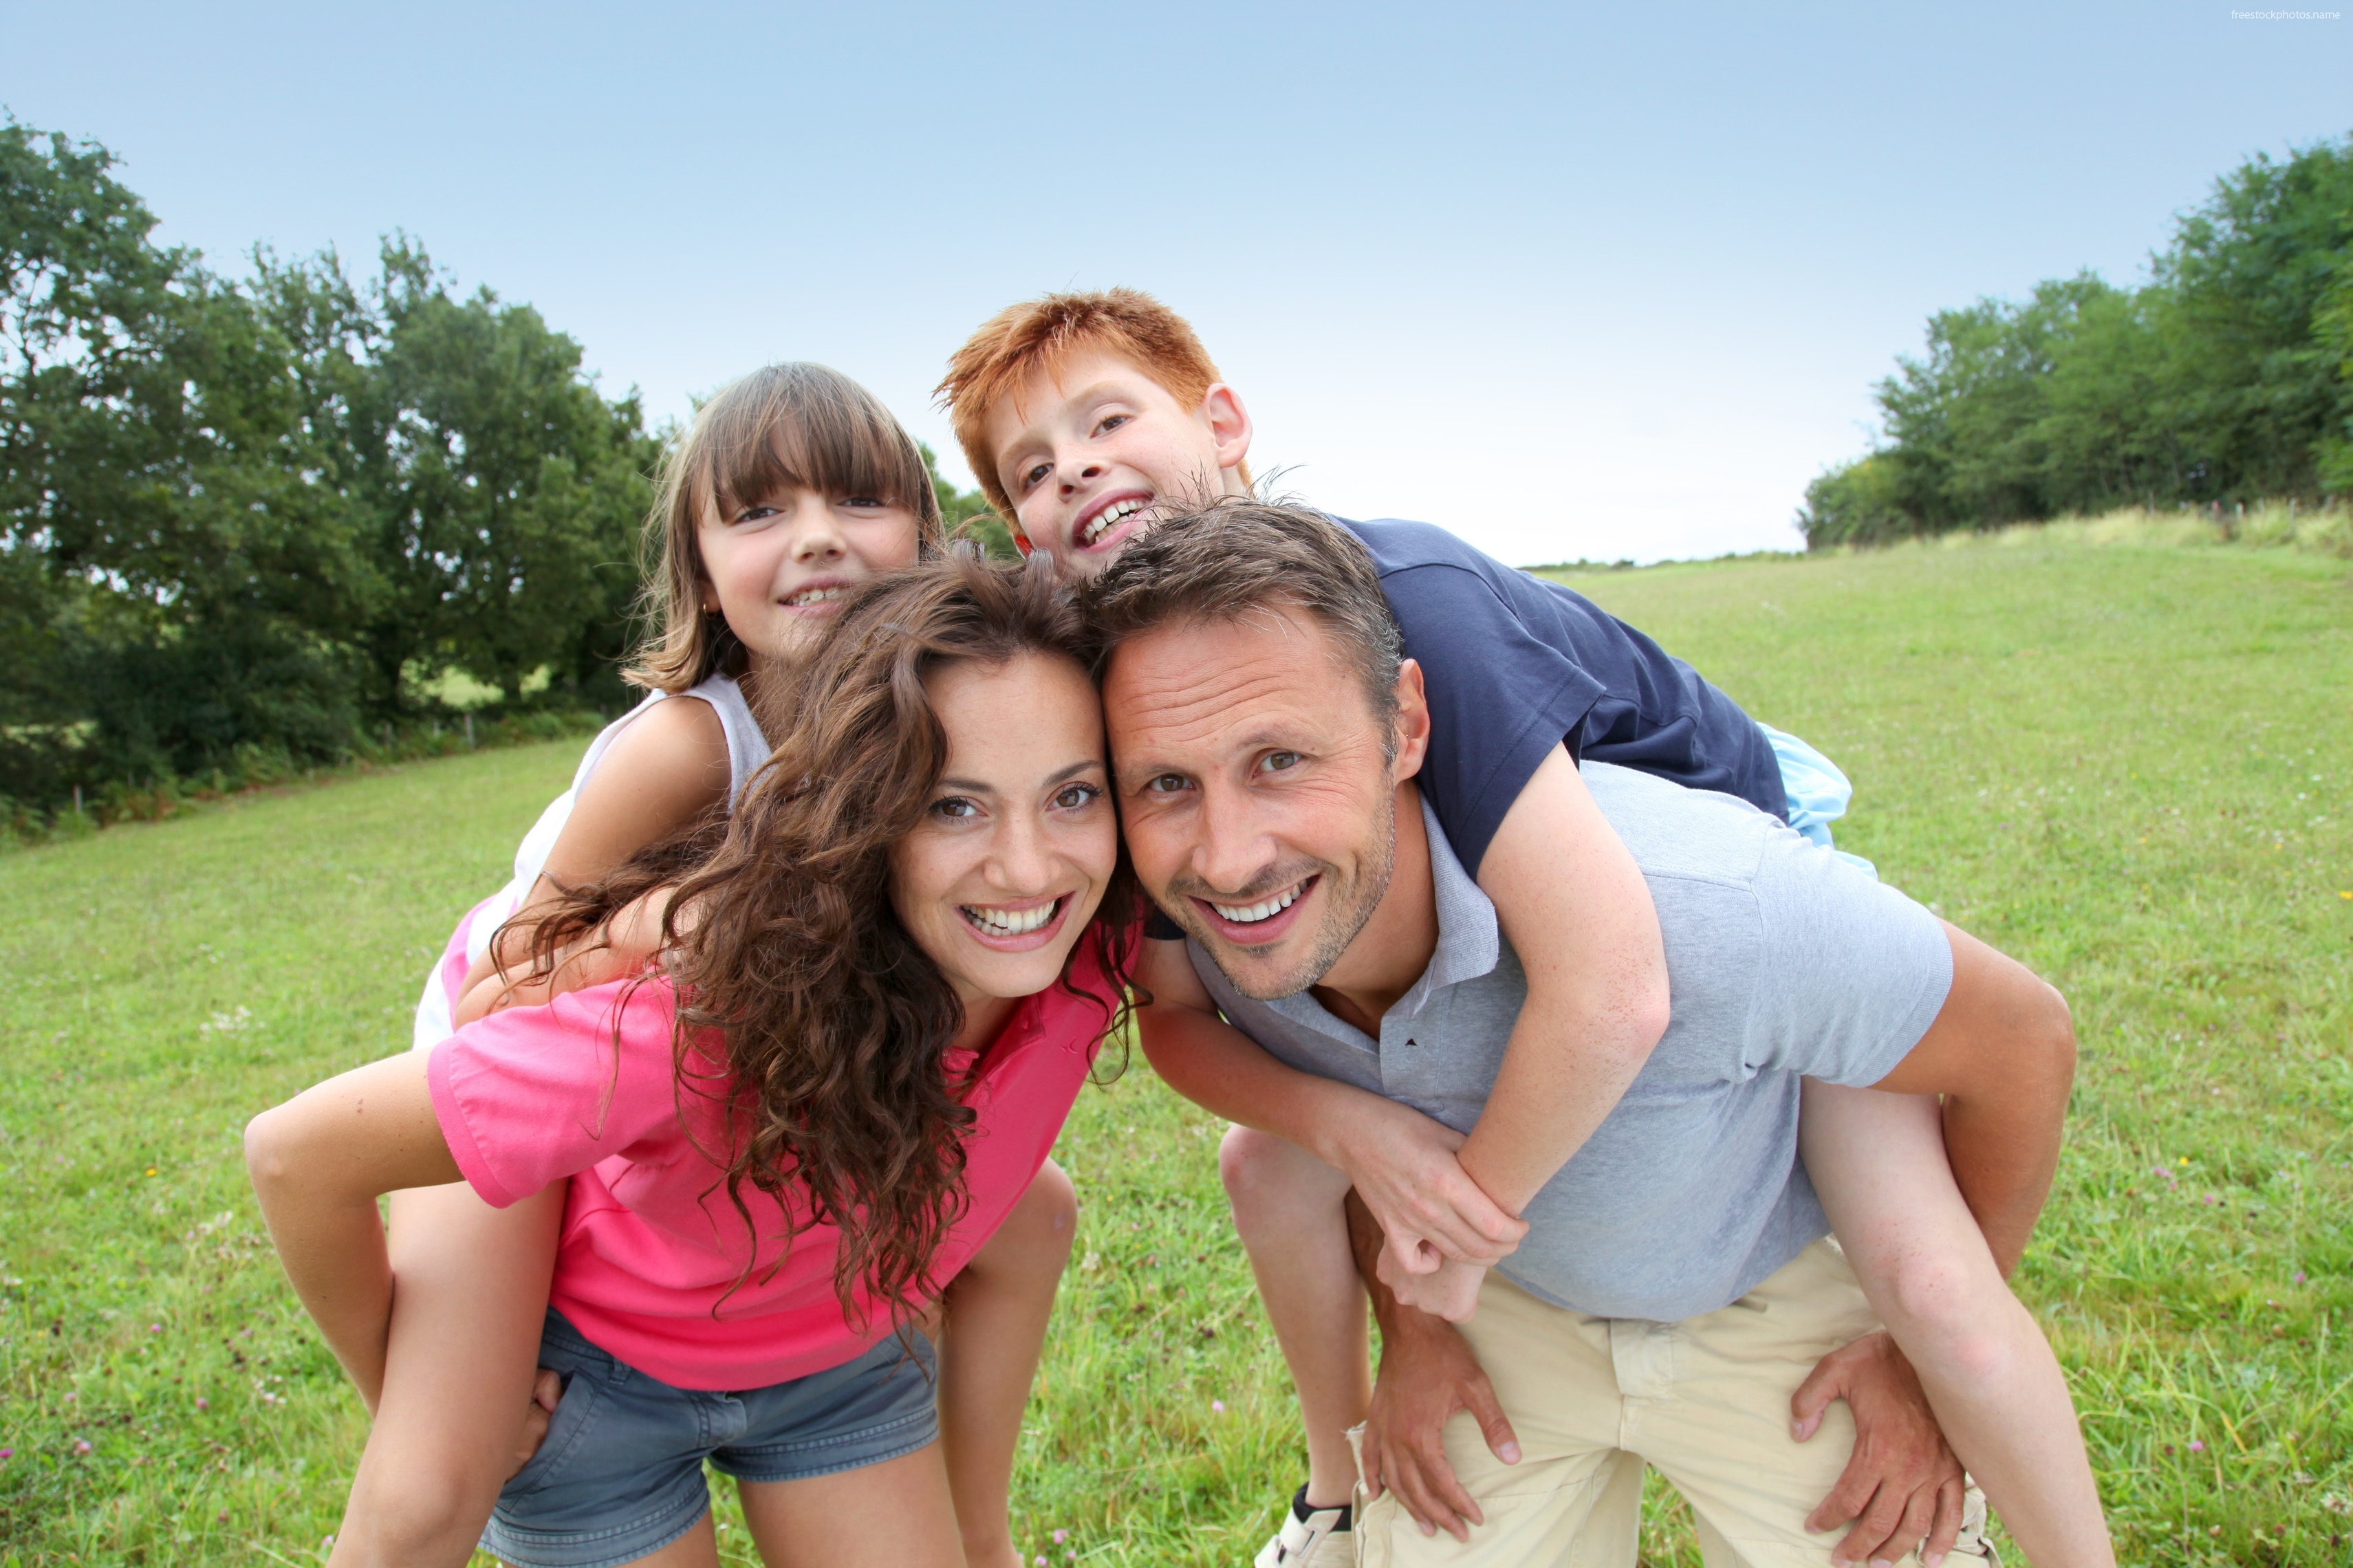  of family health images photography Royalty free photography 164